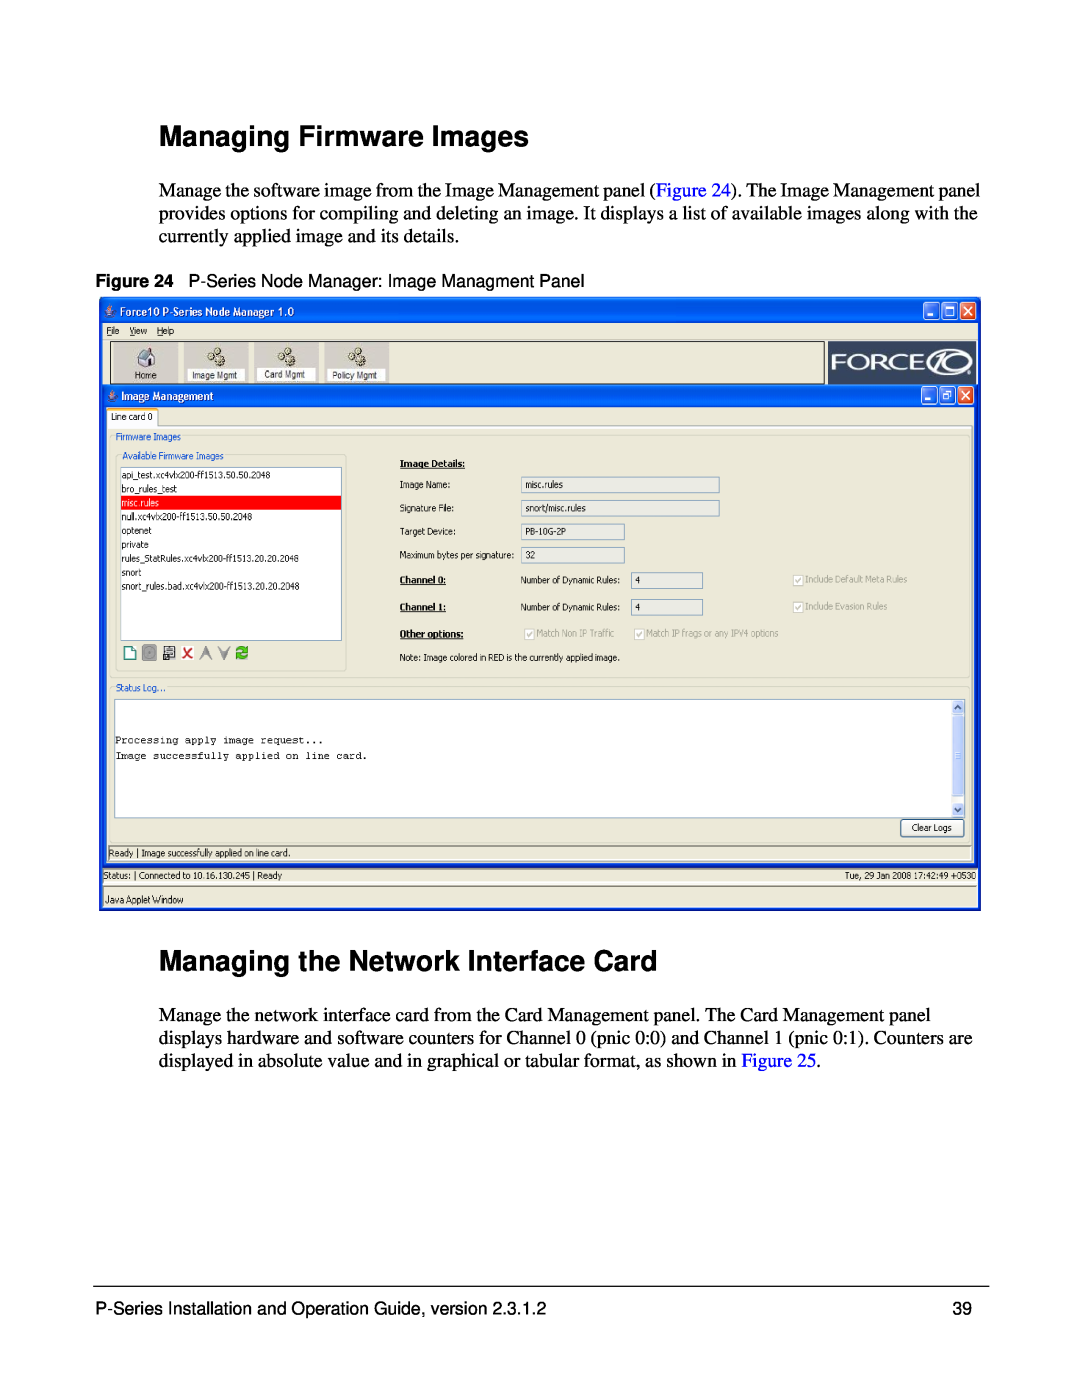 Force10 Networks 100-00055-01 manual Managing Firmware Images, Managing the Network Interface Card 